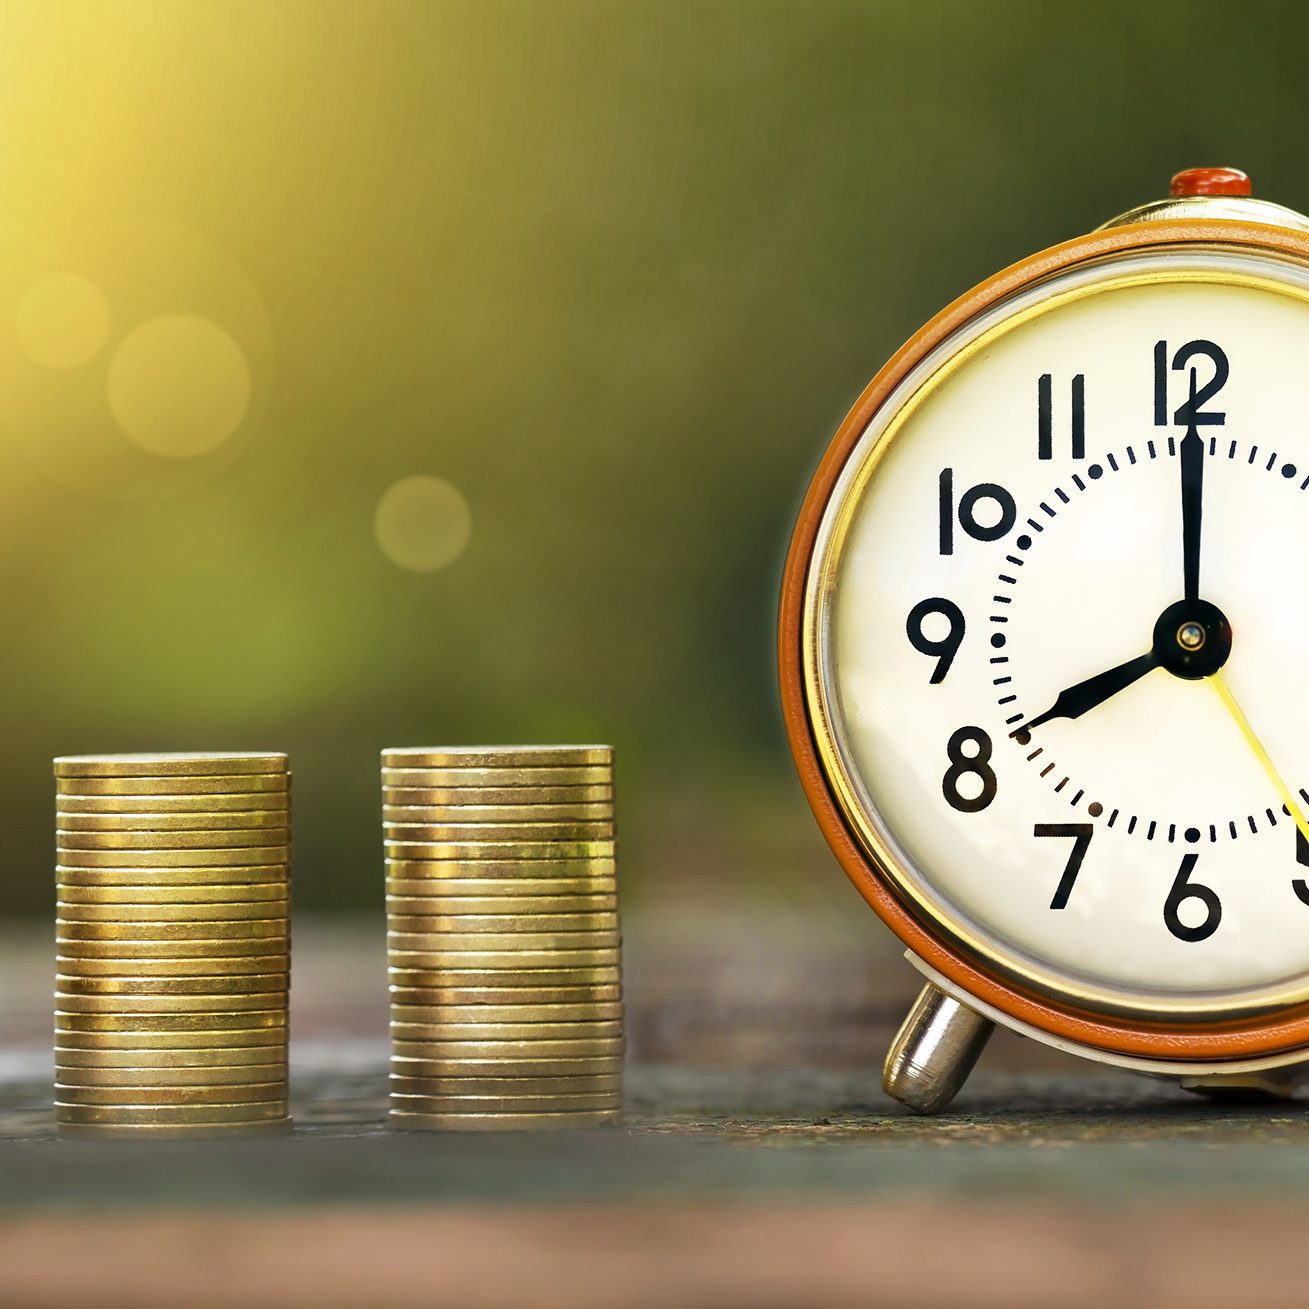 Golden coins and time - web banner of money savings concept